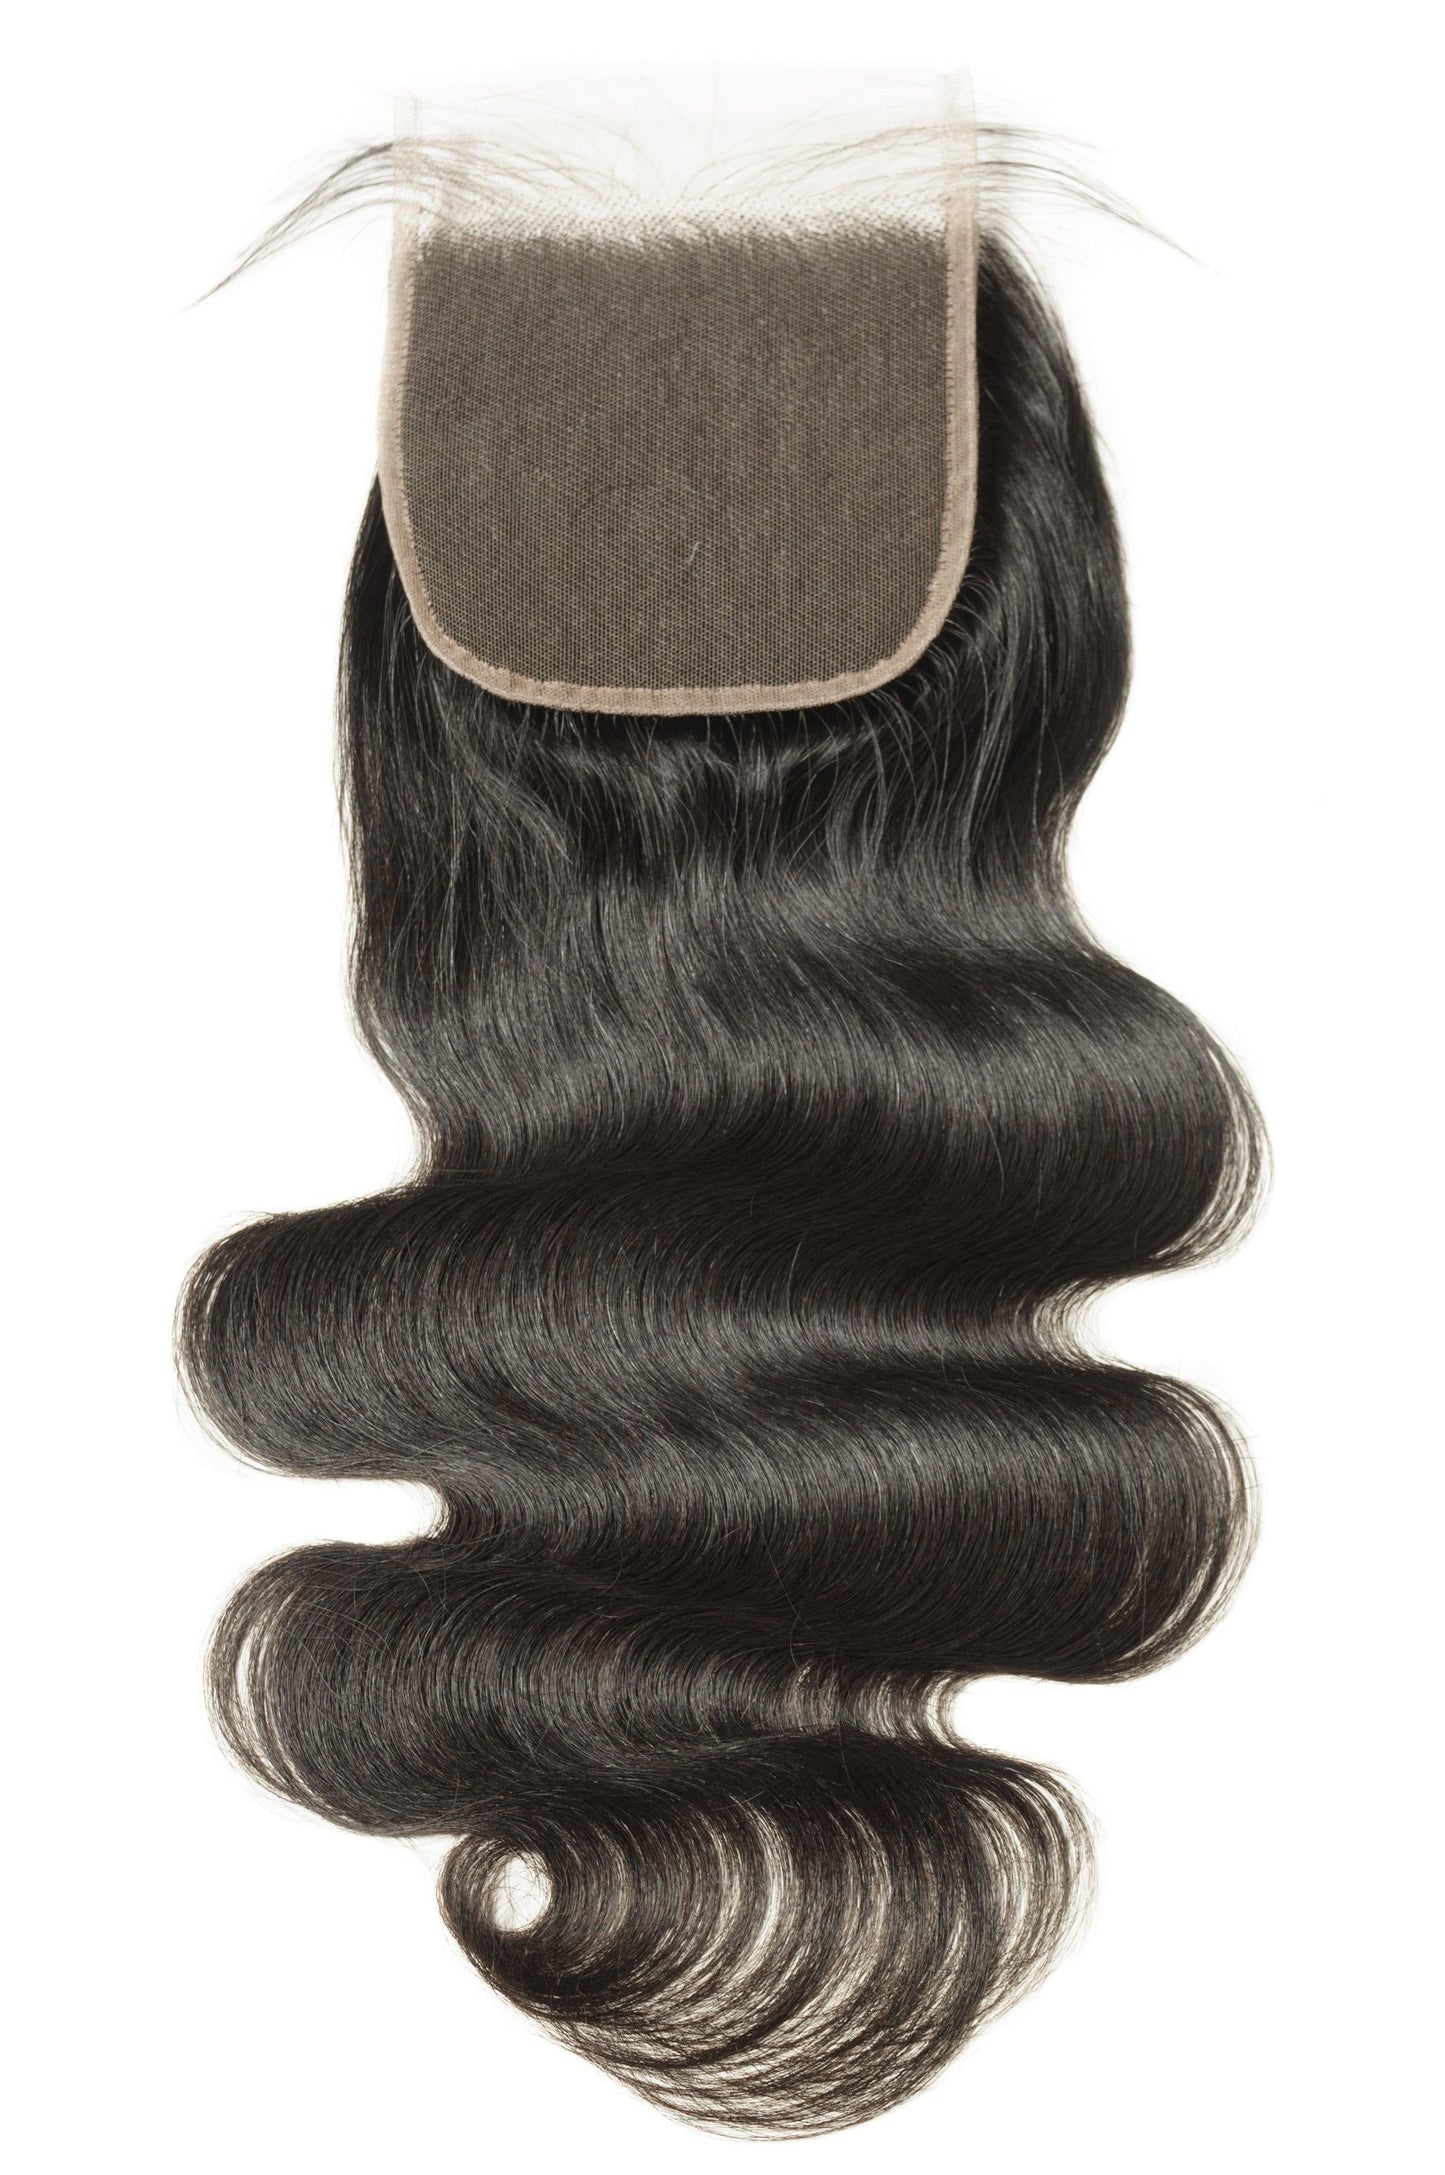 Indian Body Wave Closure